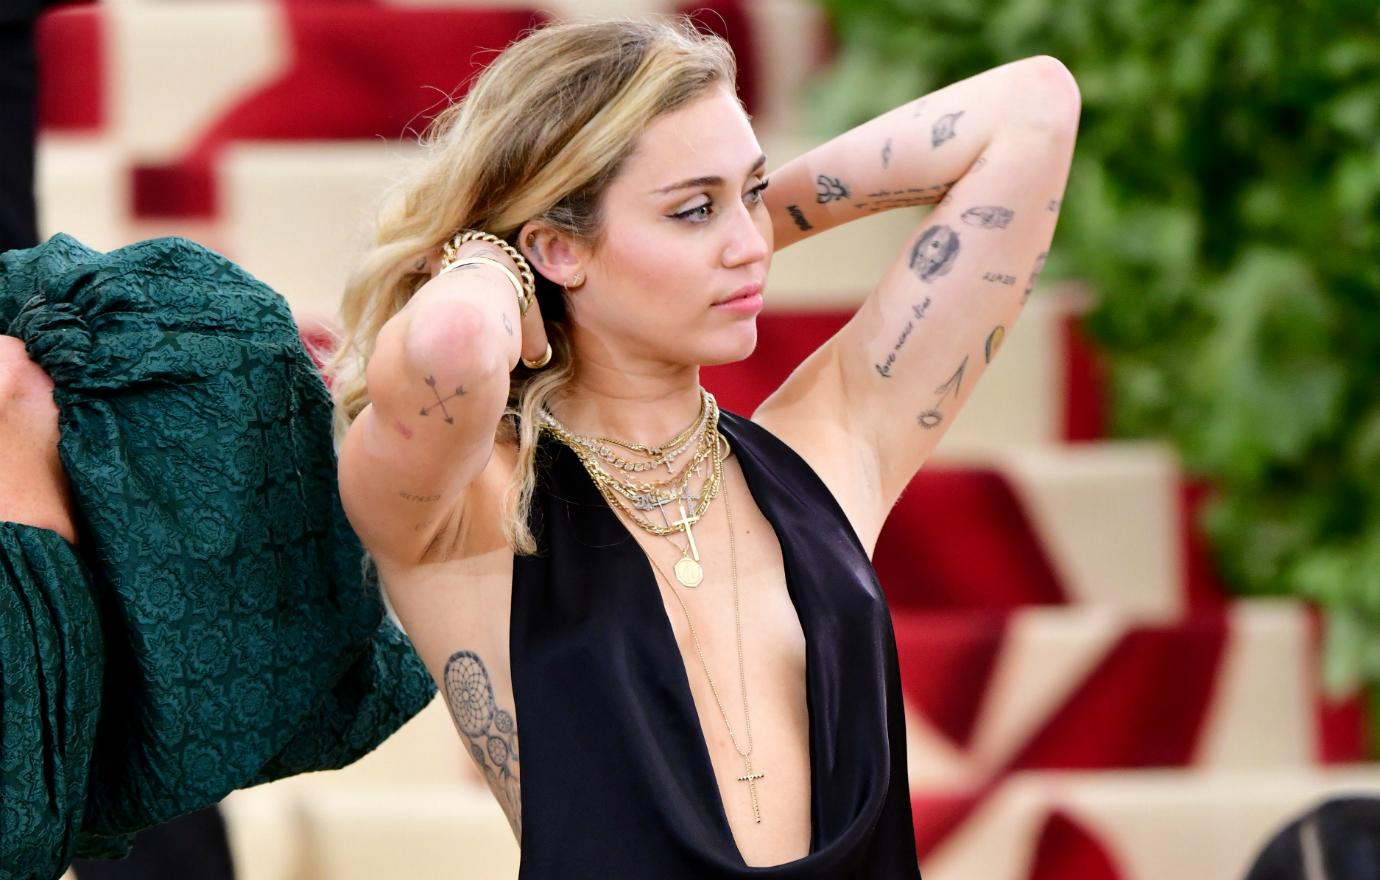 20 Celebs Who Are Covered In Tattoos